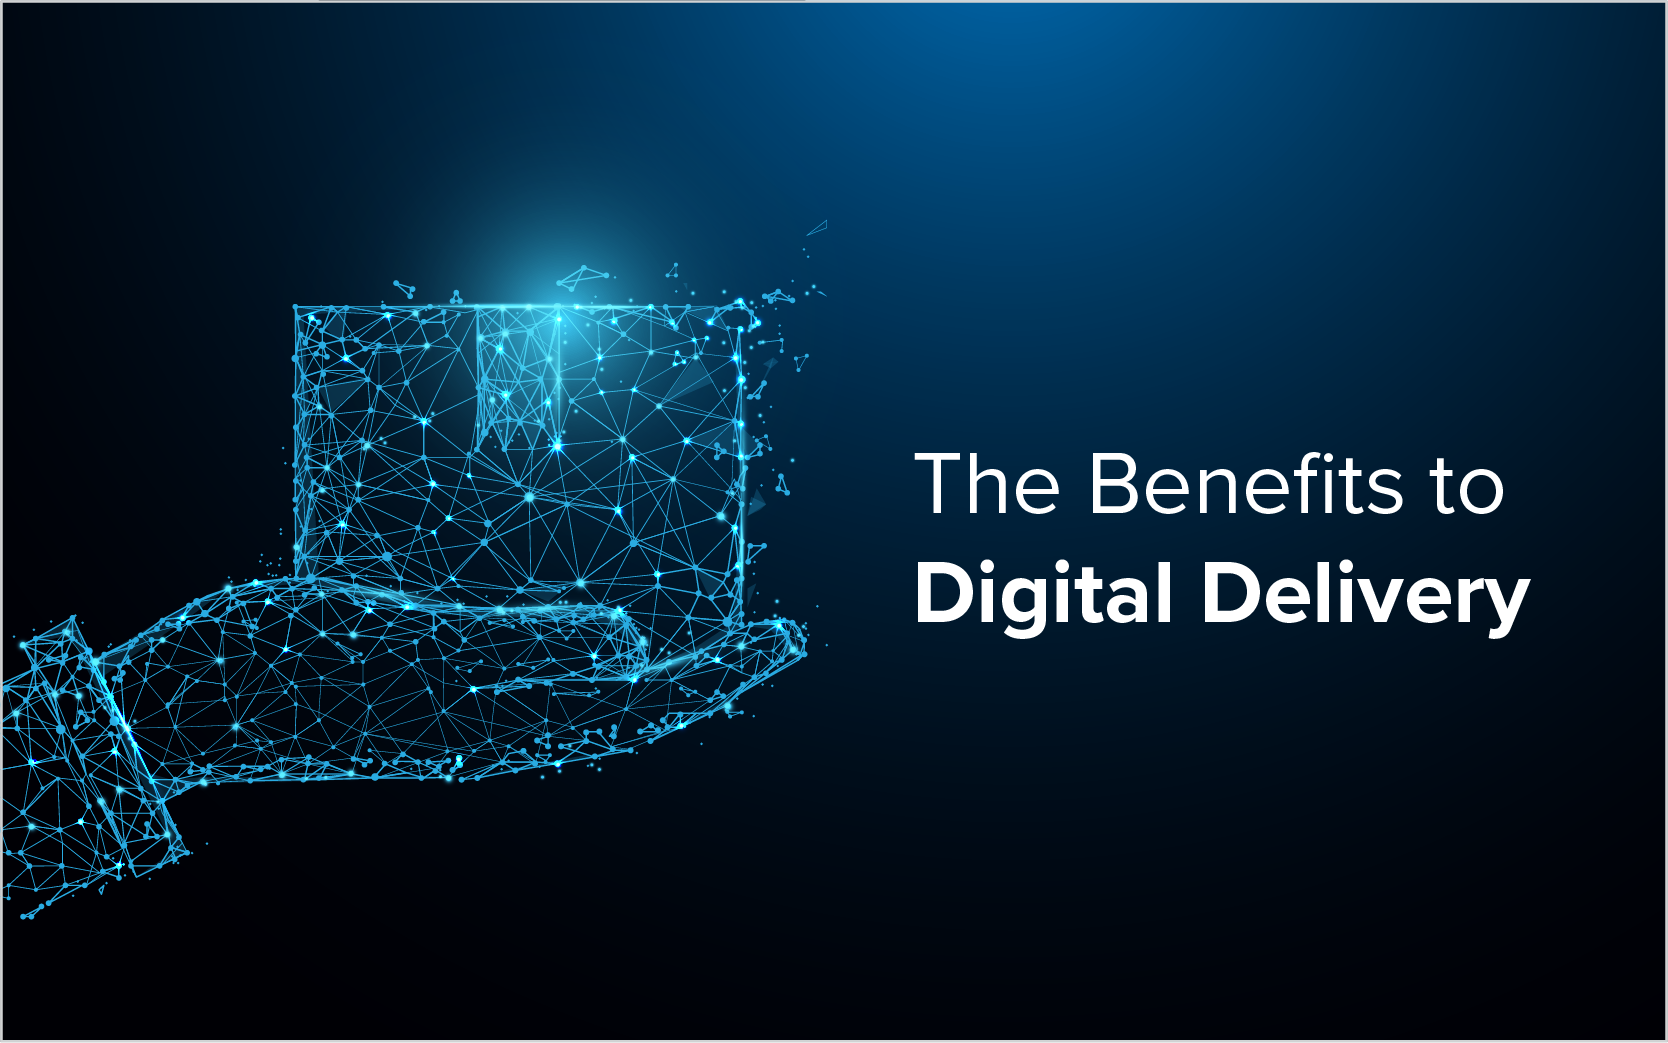 The Benefits to Digital Delivery